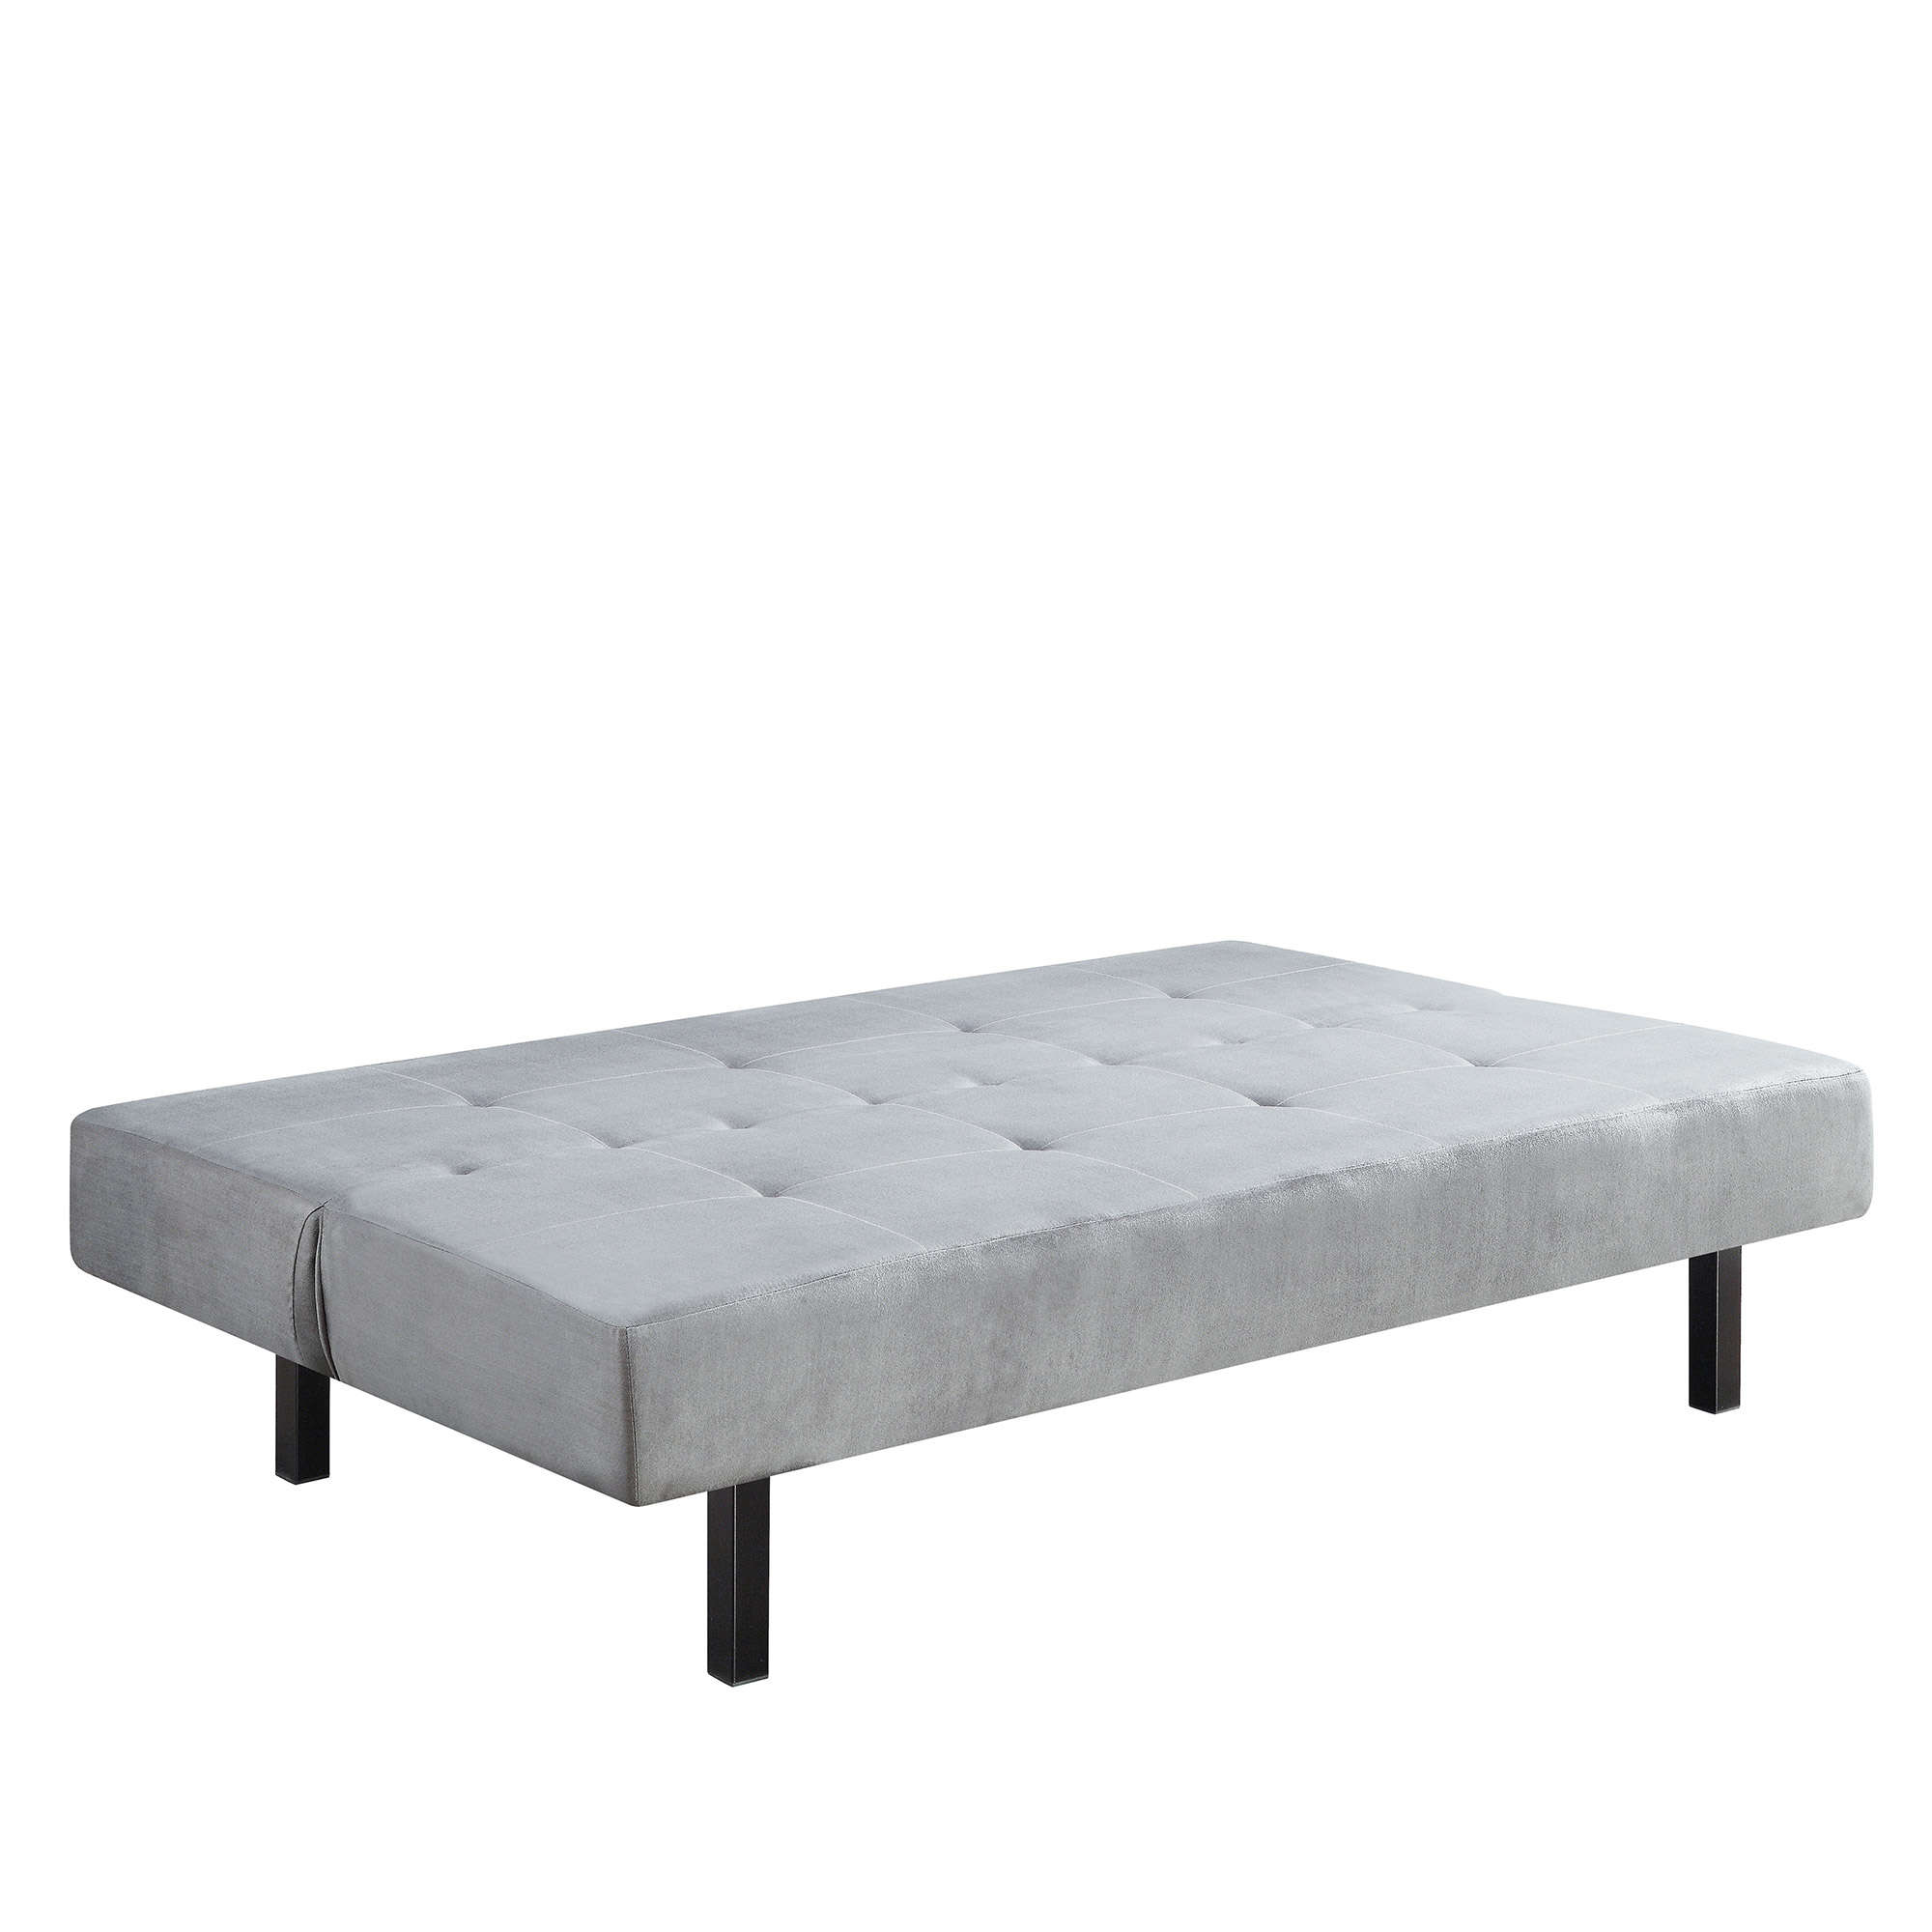 Mainstays 68? 3-Position Tufted Futon, Gray - image 5 of 6